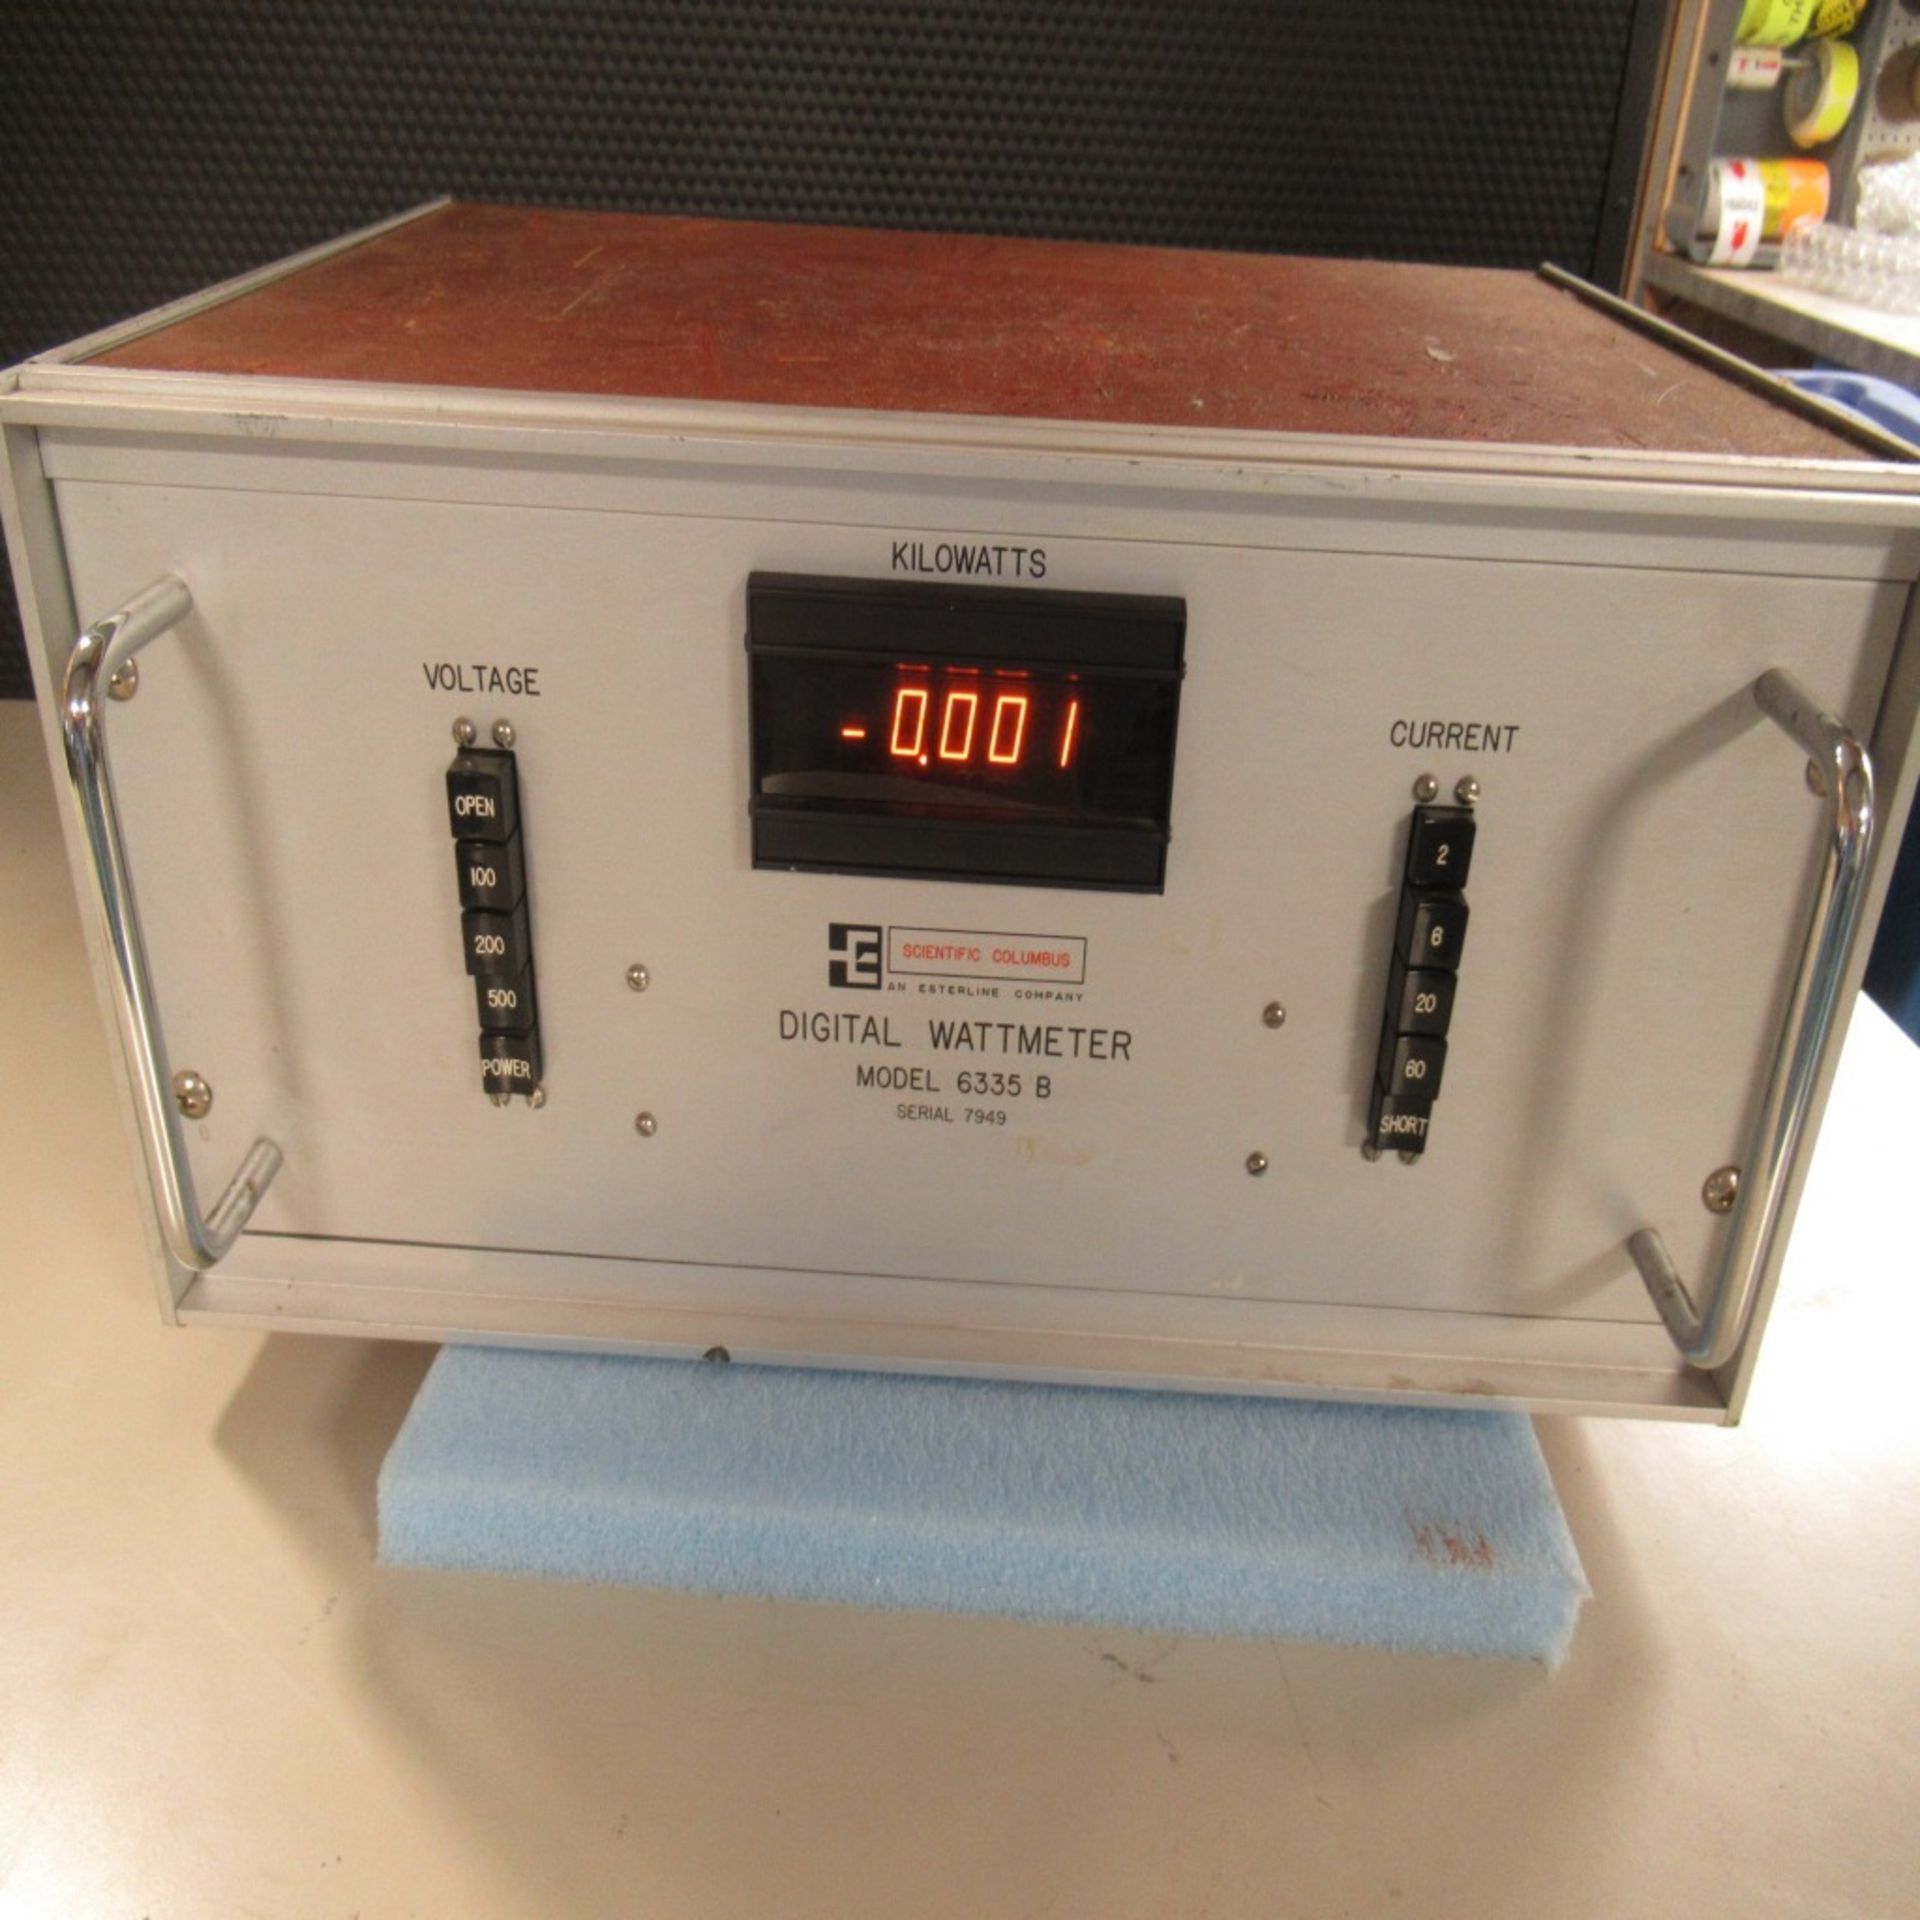 PHOTON SNAP SHOT MODEL 6000 *POWERS ON* NO SCREEN DISPLAY; FARNELL AP20-80 REGULATED POWER SUPPLY * - Image 151 of 222